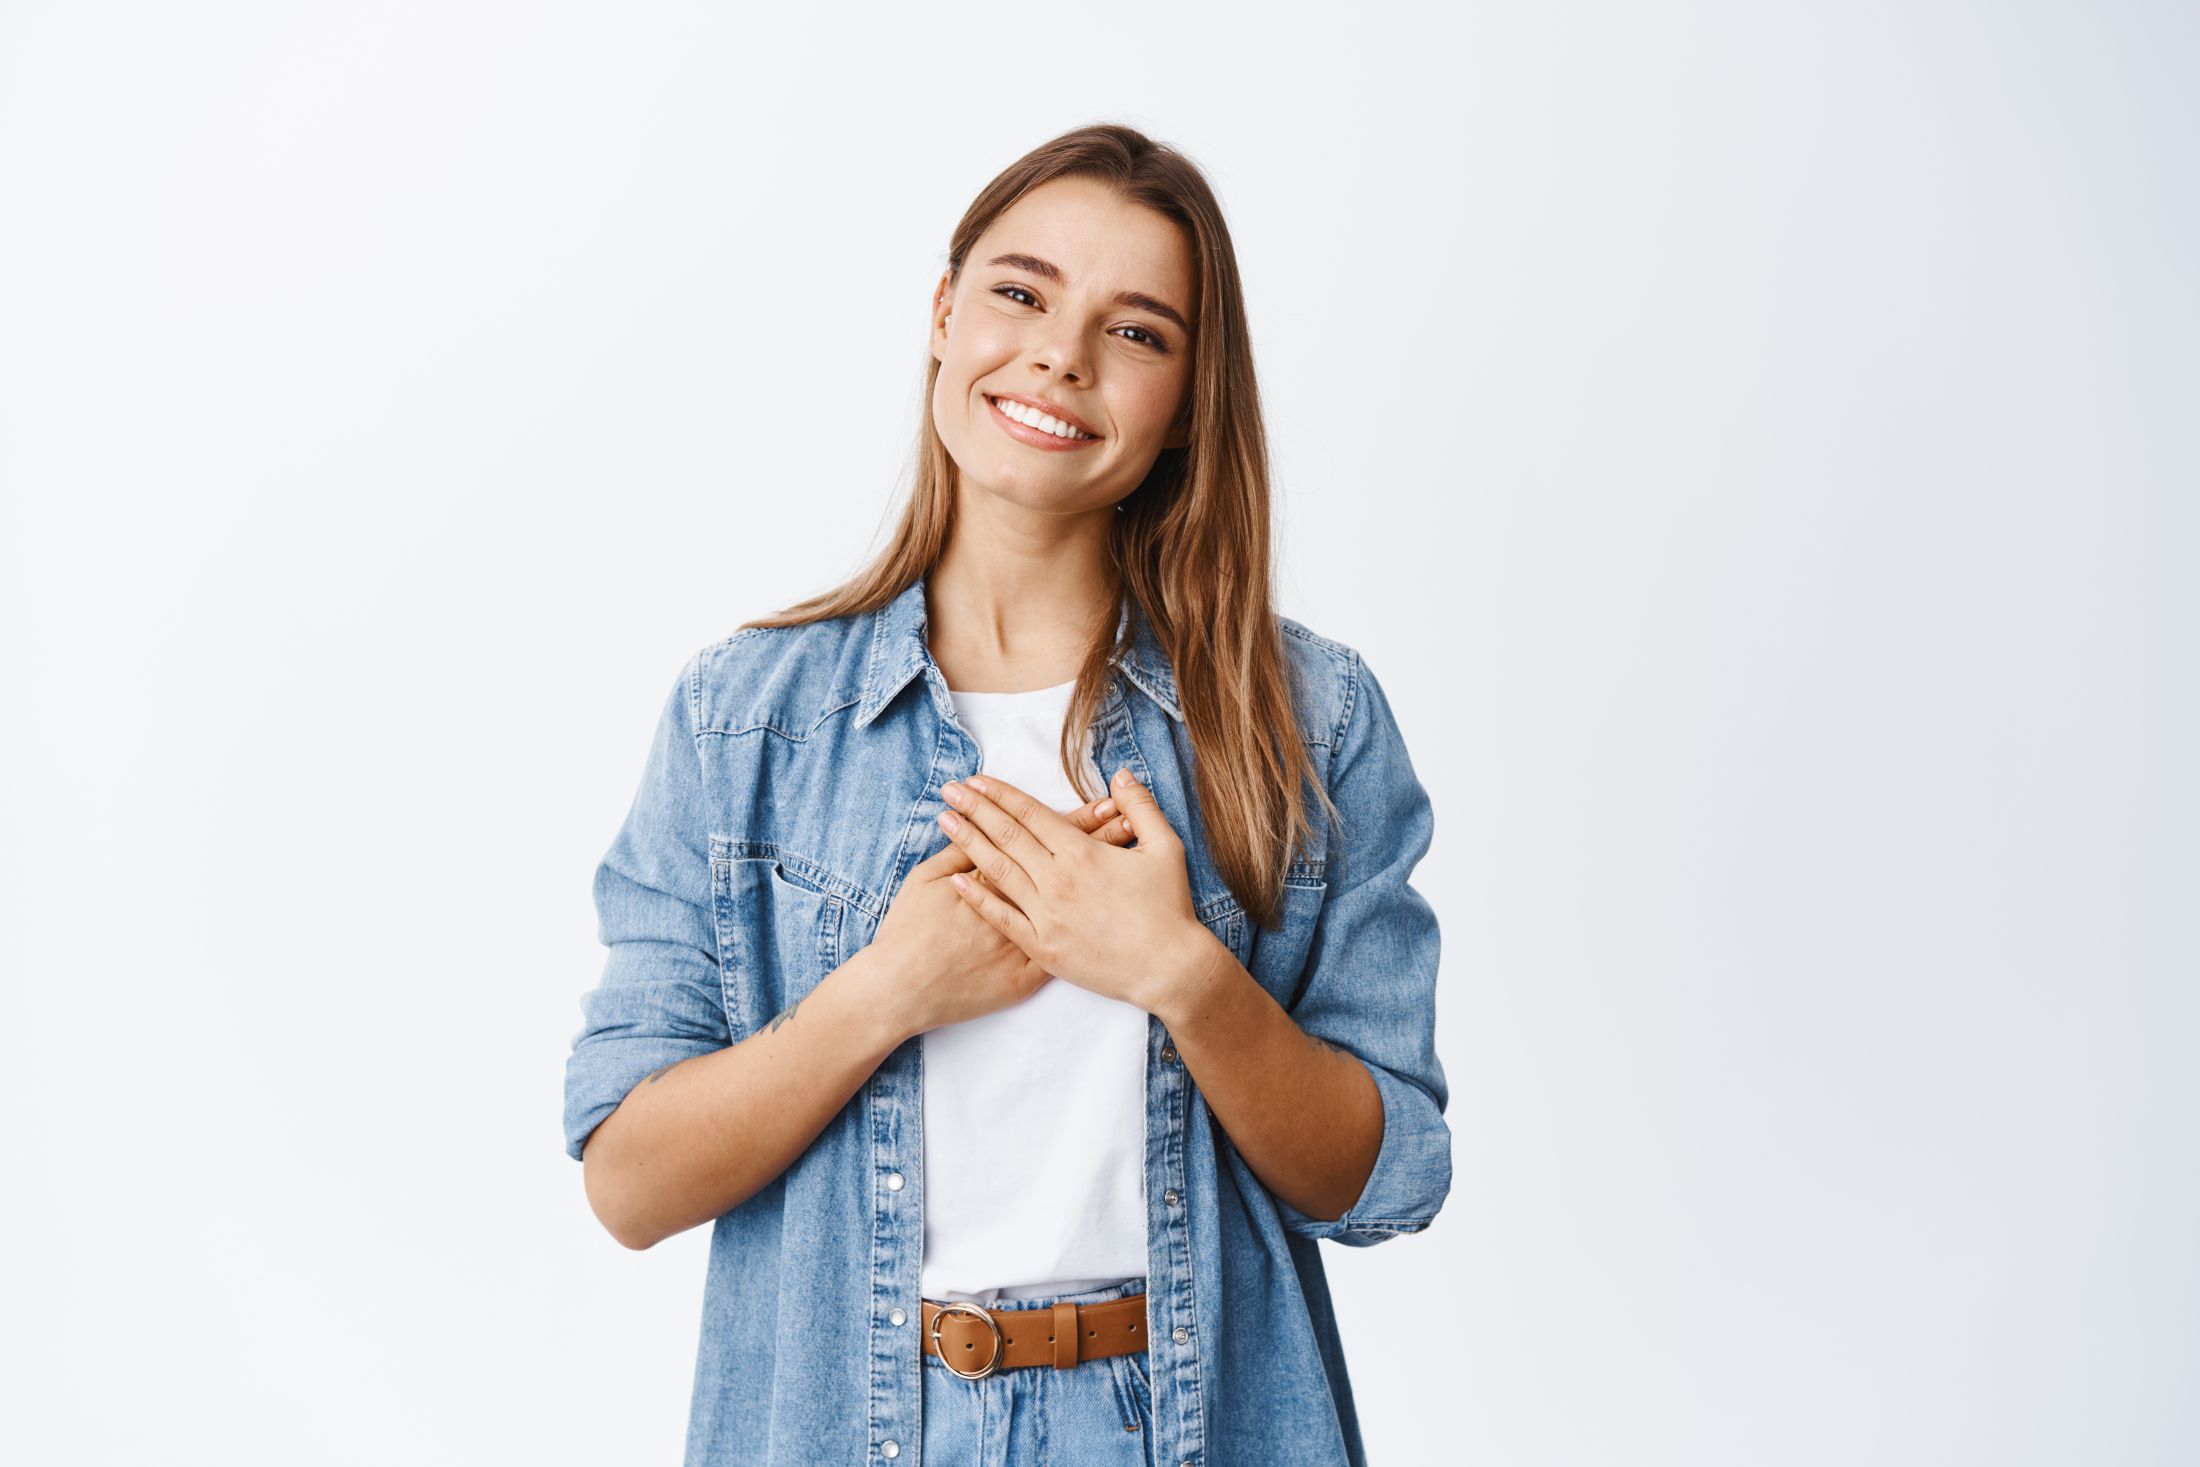 portrait-touched-young-woman-feeling-flattered-holding-hands-heart-smiling-white-teeth-say-thank-you-appreciate-help-being-grateful-nice-gesture-white.jpg